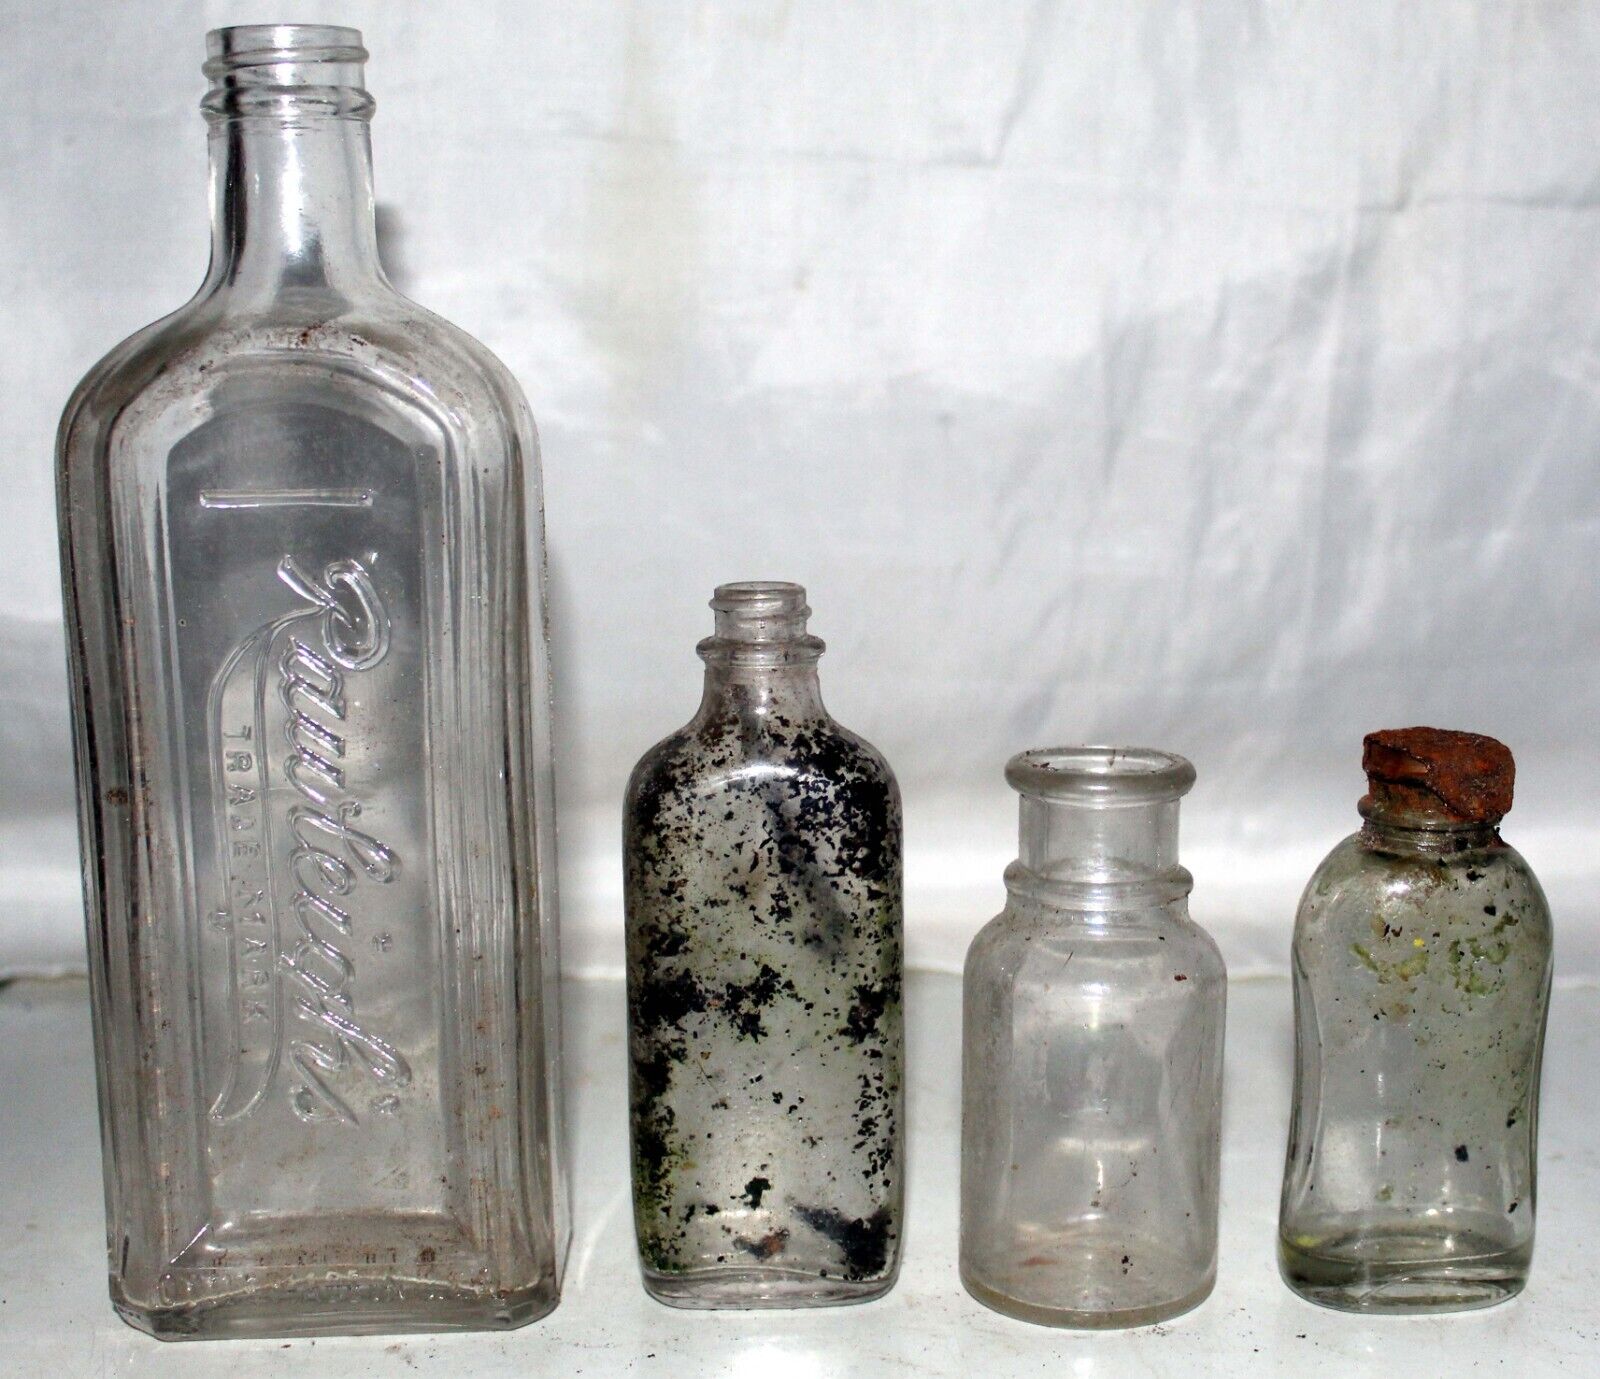 Vintage Pre-1930's Apothecary Bottle Lot (Rawleigh's) LOOK